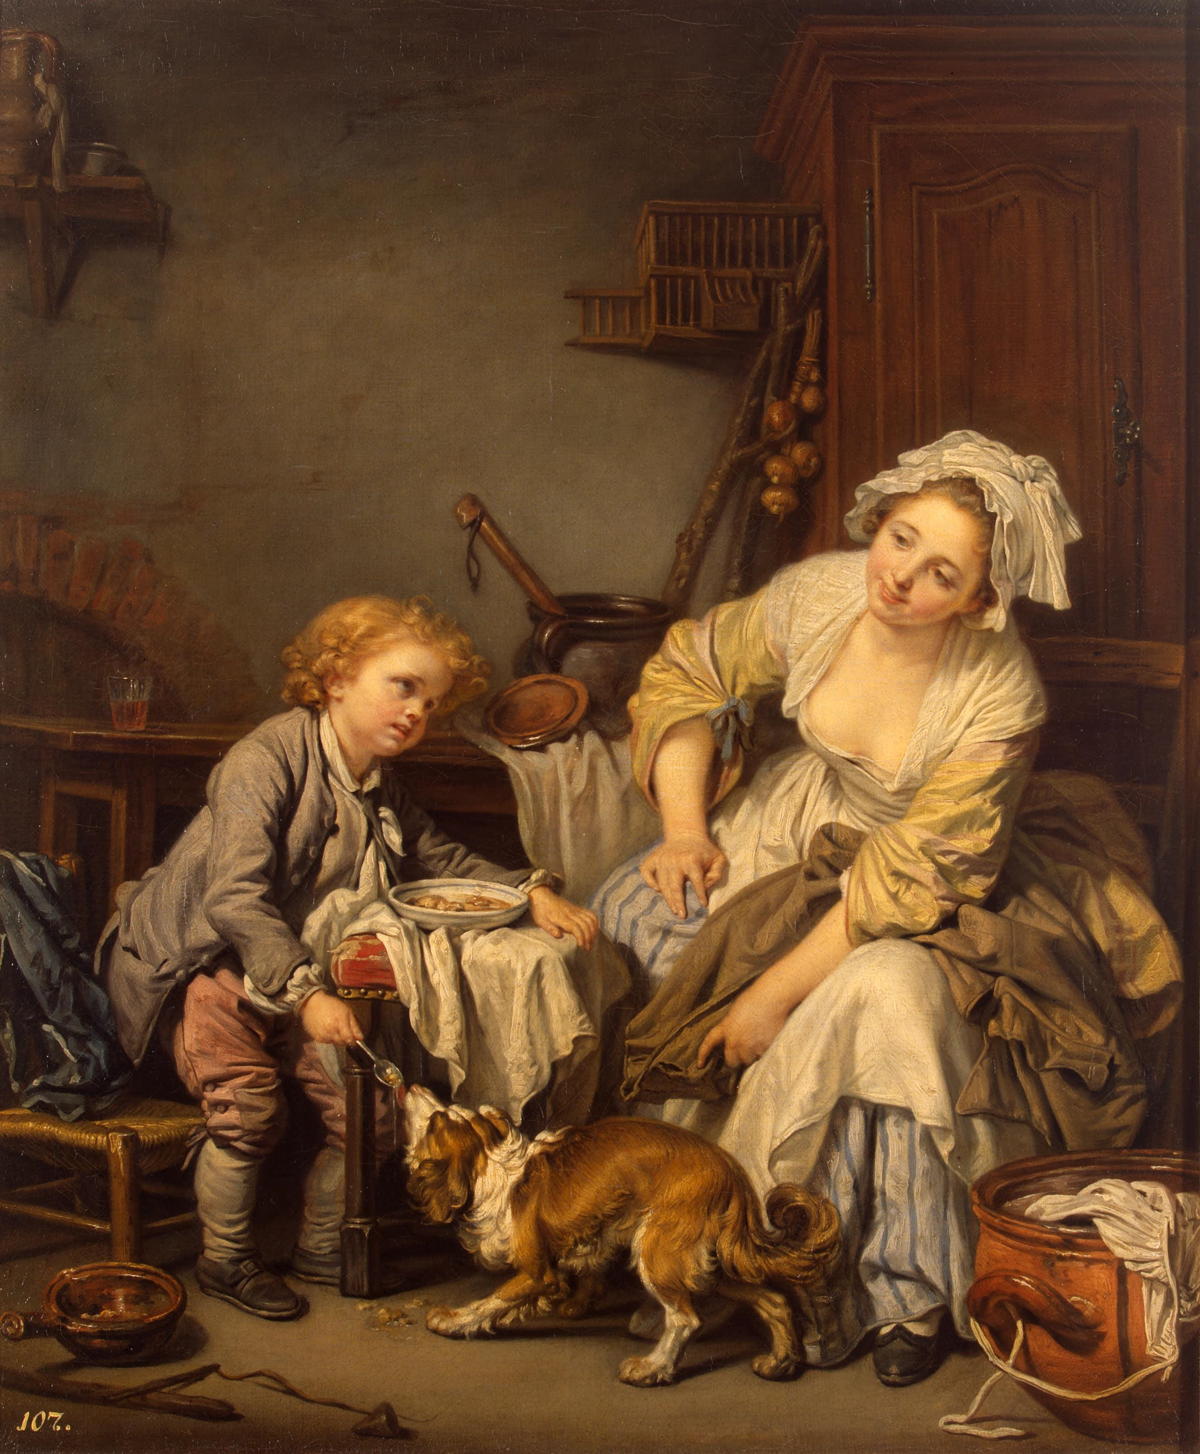 The Spoiled Child by Jean Baptiste Greuze